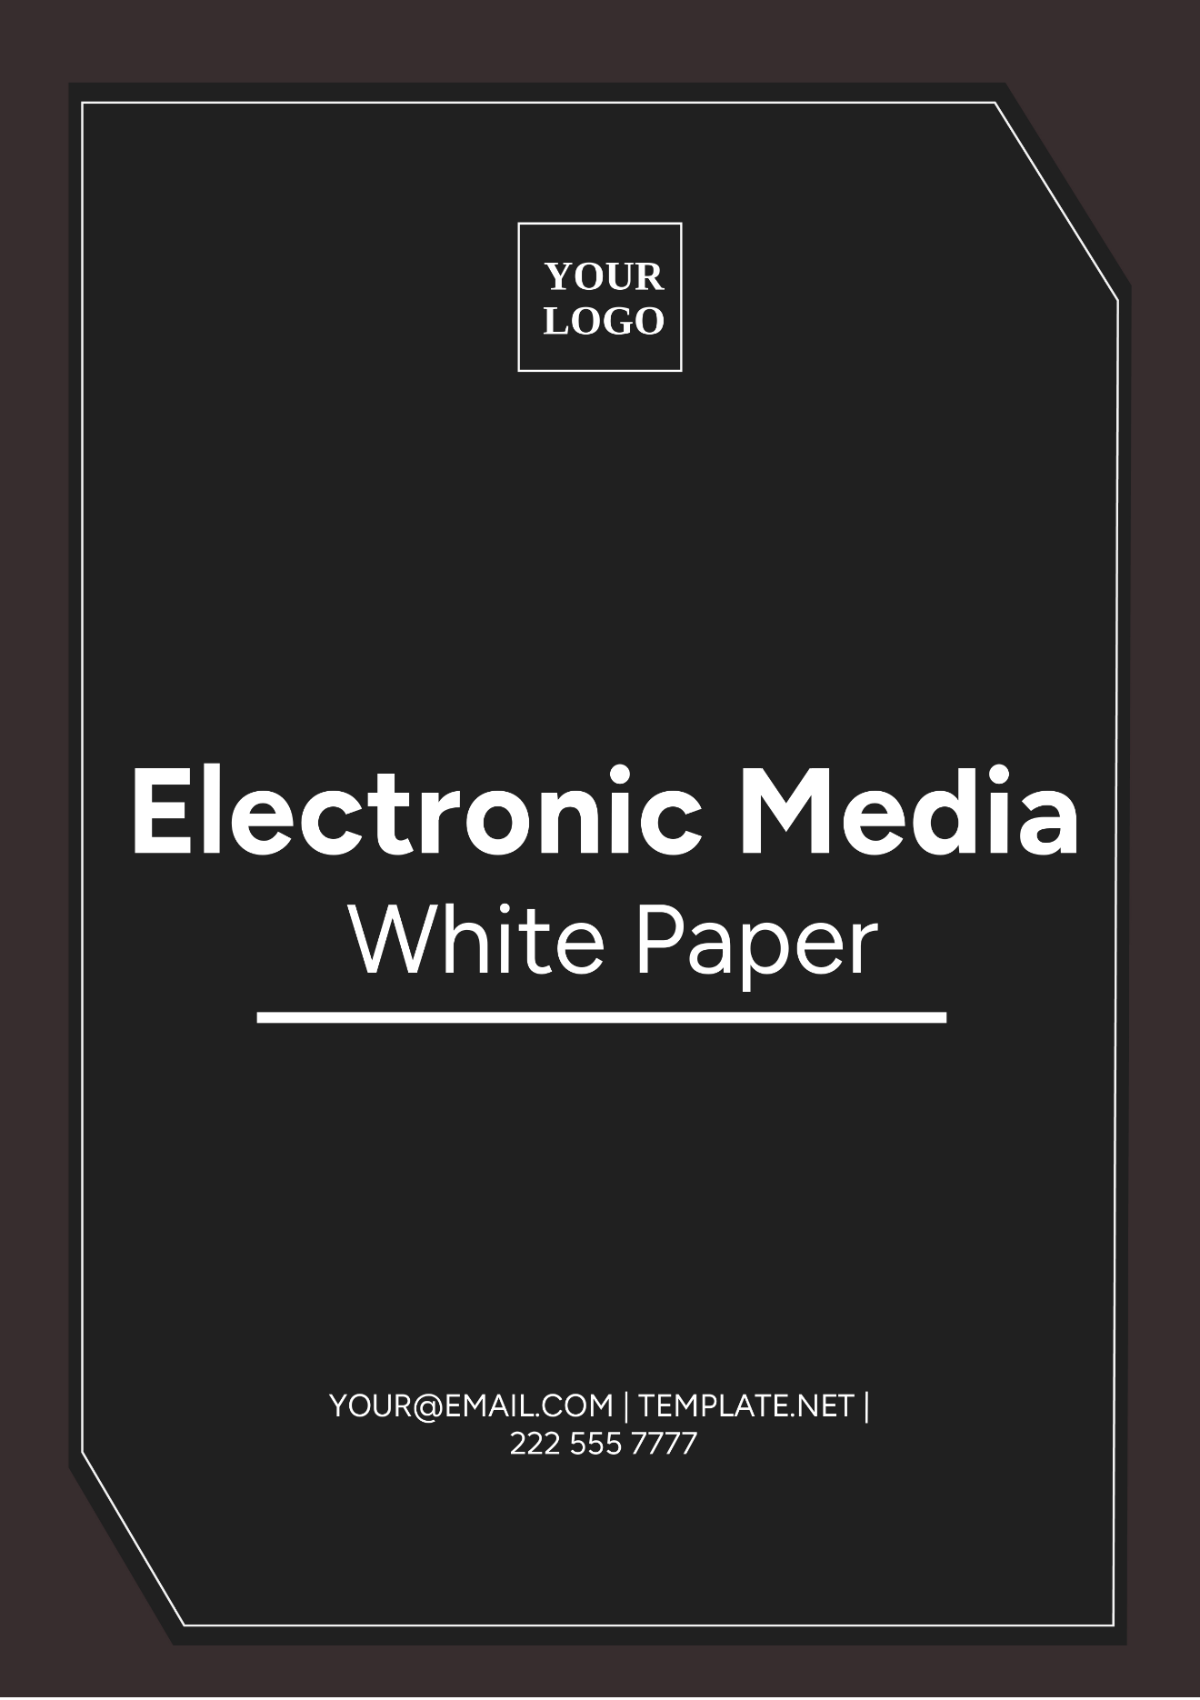 Electronic Media White Paper Template